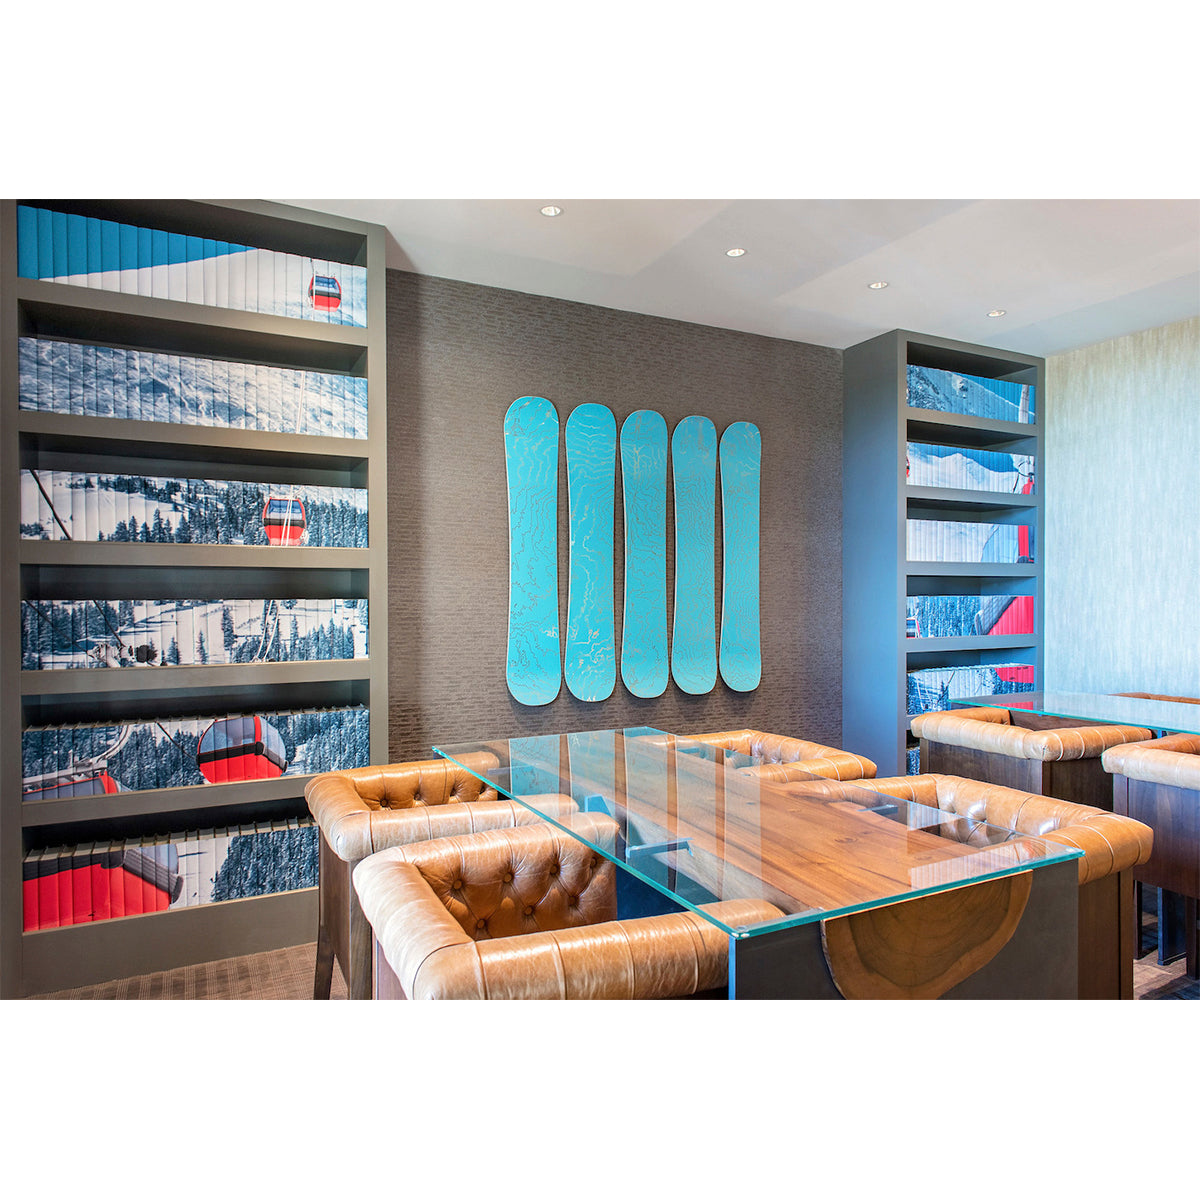 Hotel Bar Restaurant Spa Hospitality Library - Full Custom - Get Started with a Deposit